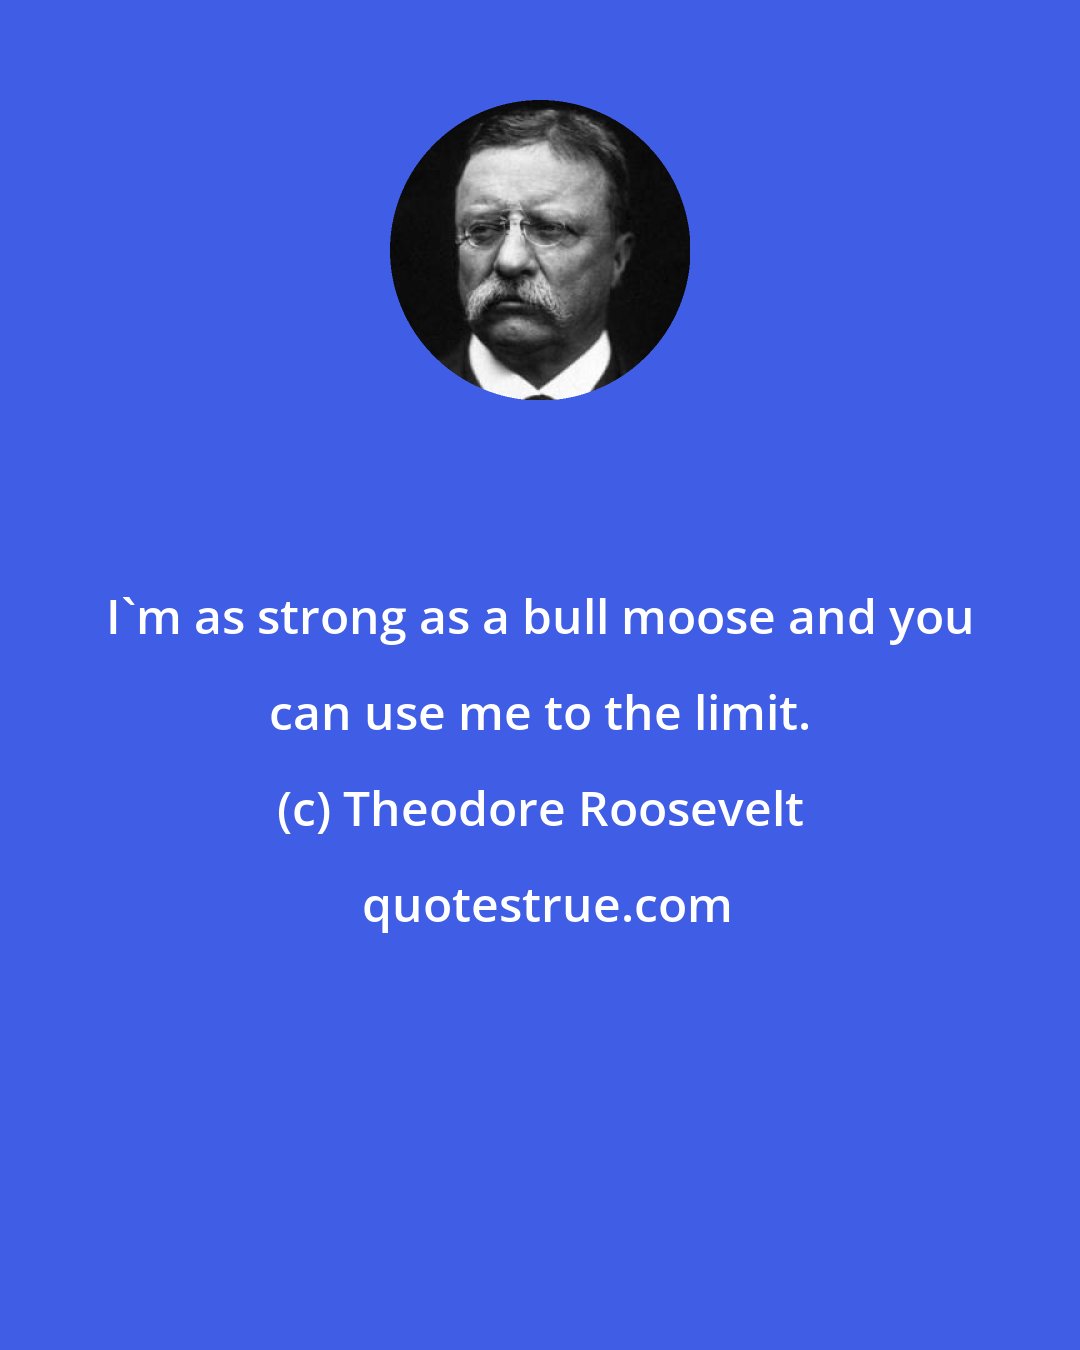 Theodore Roosevelt: I'm as strong as a bull moose and you can use me to the limit.